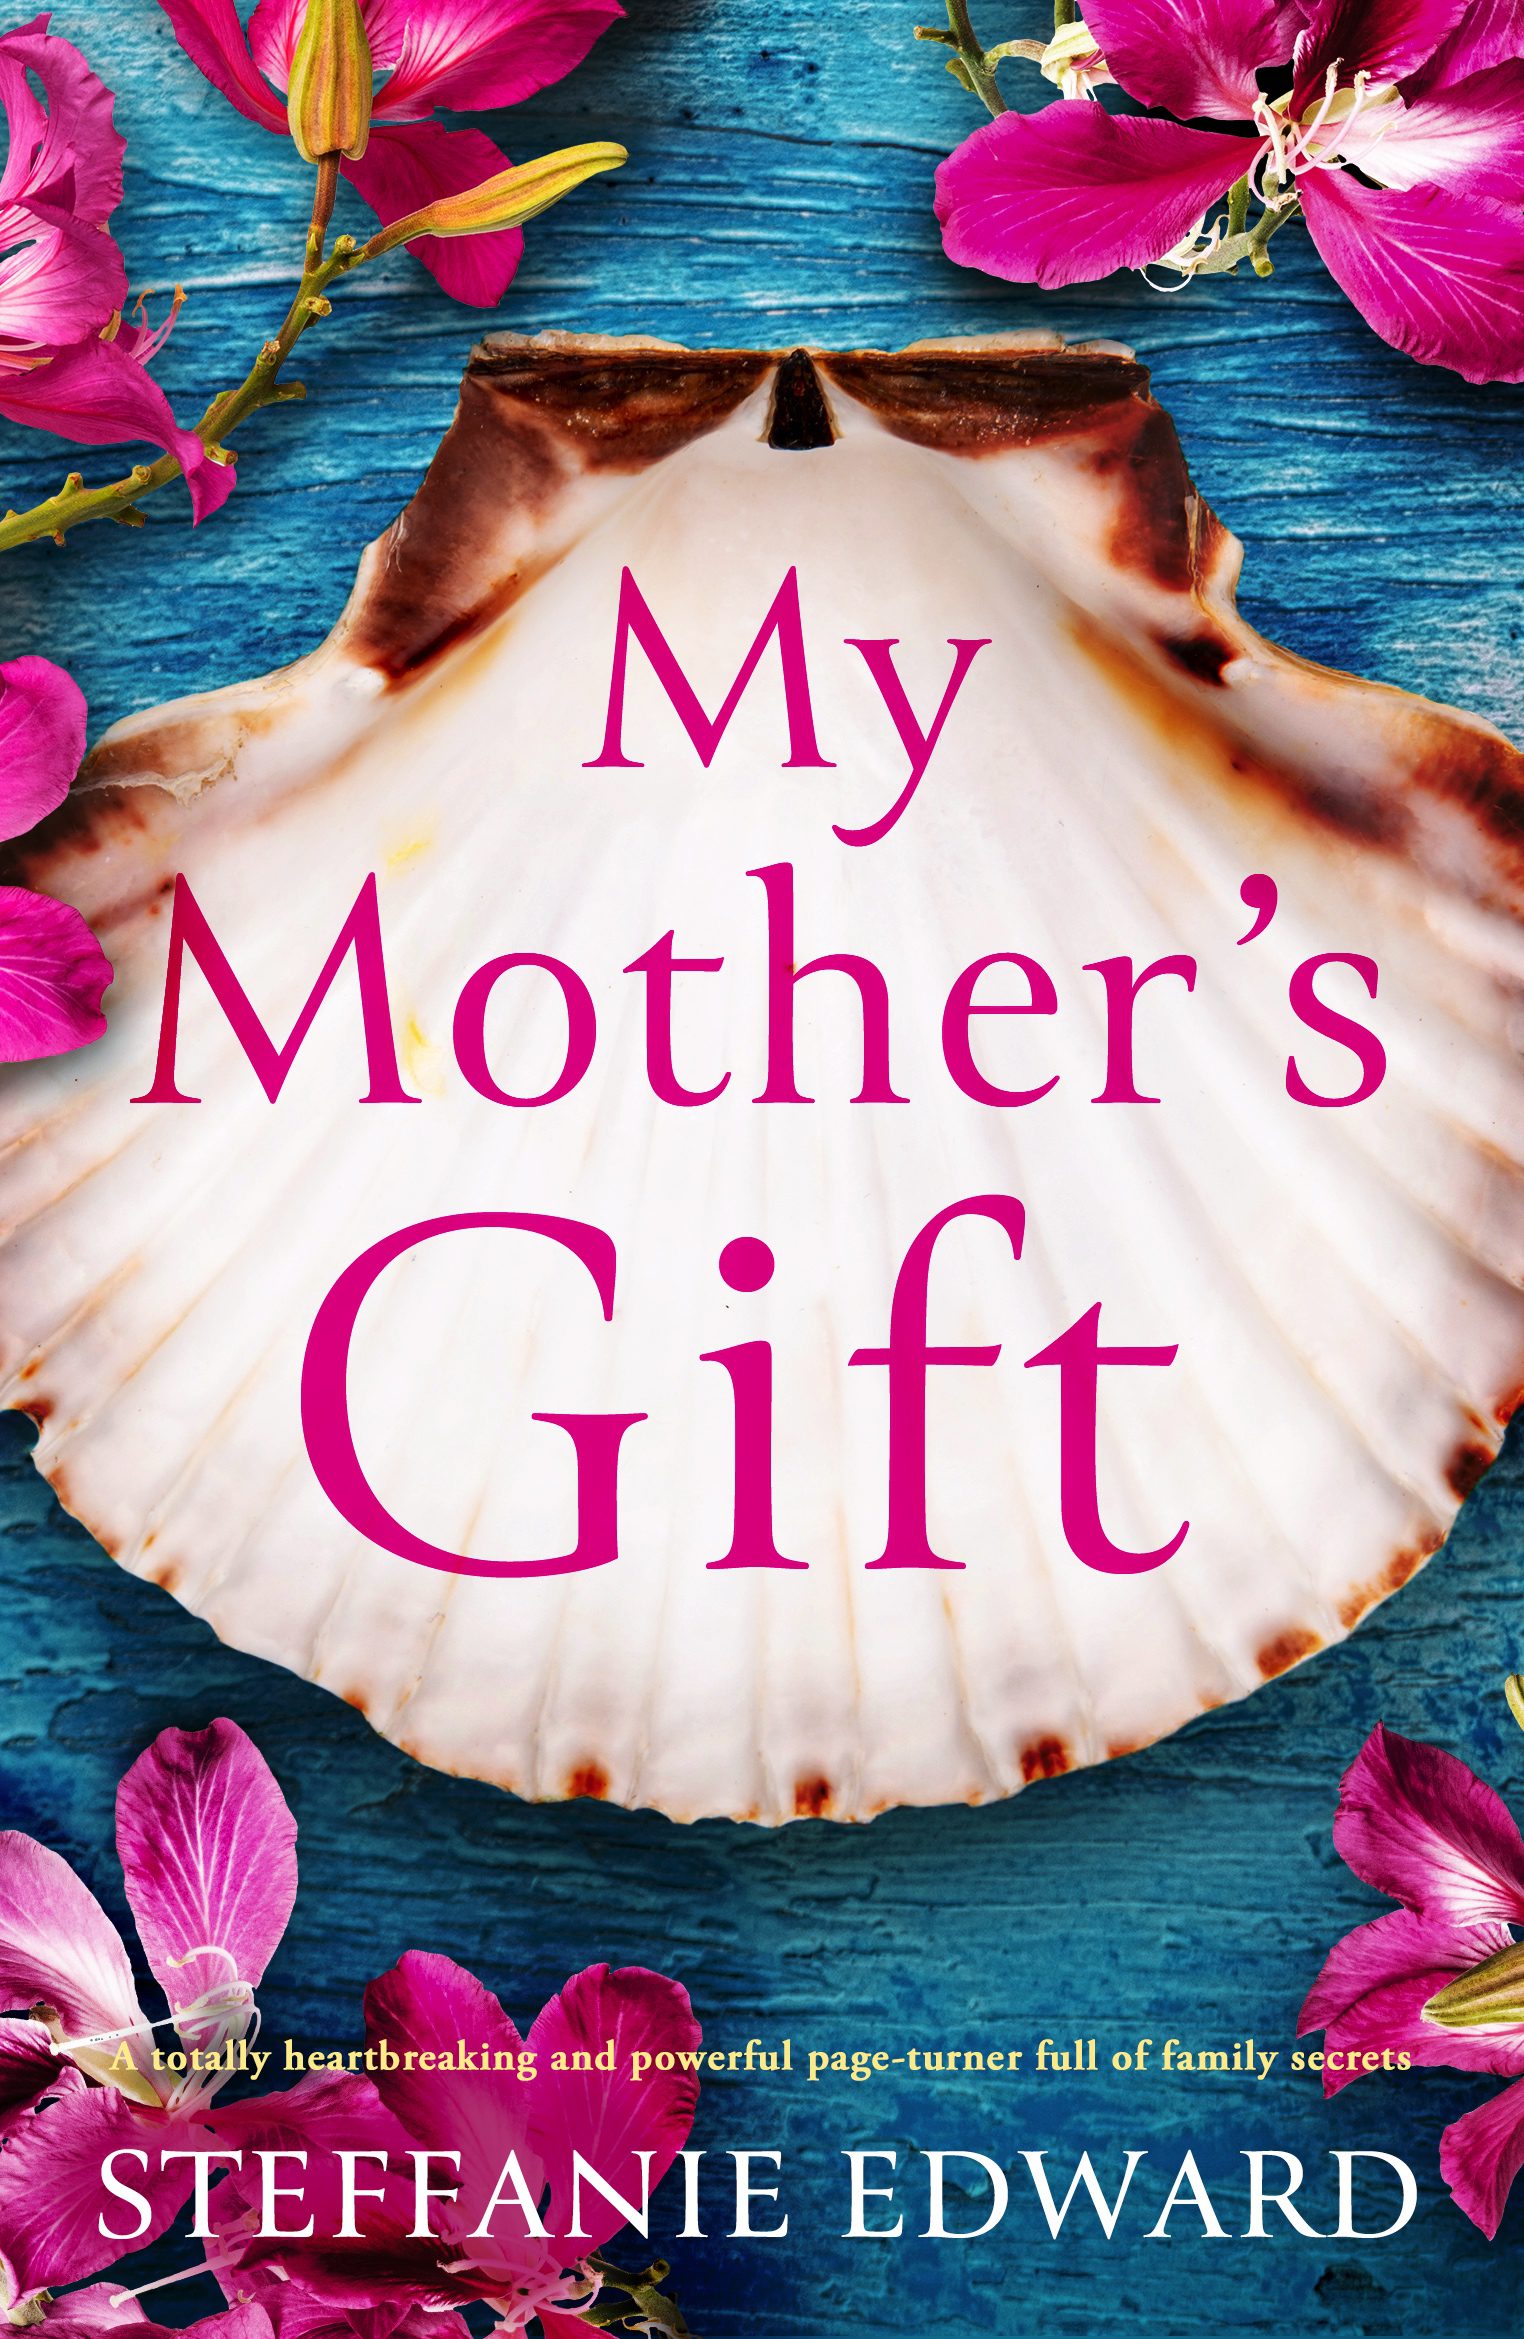 My Mother's Gift book cover